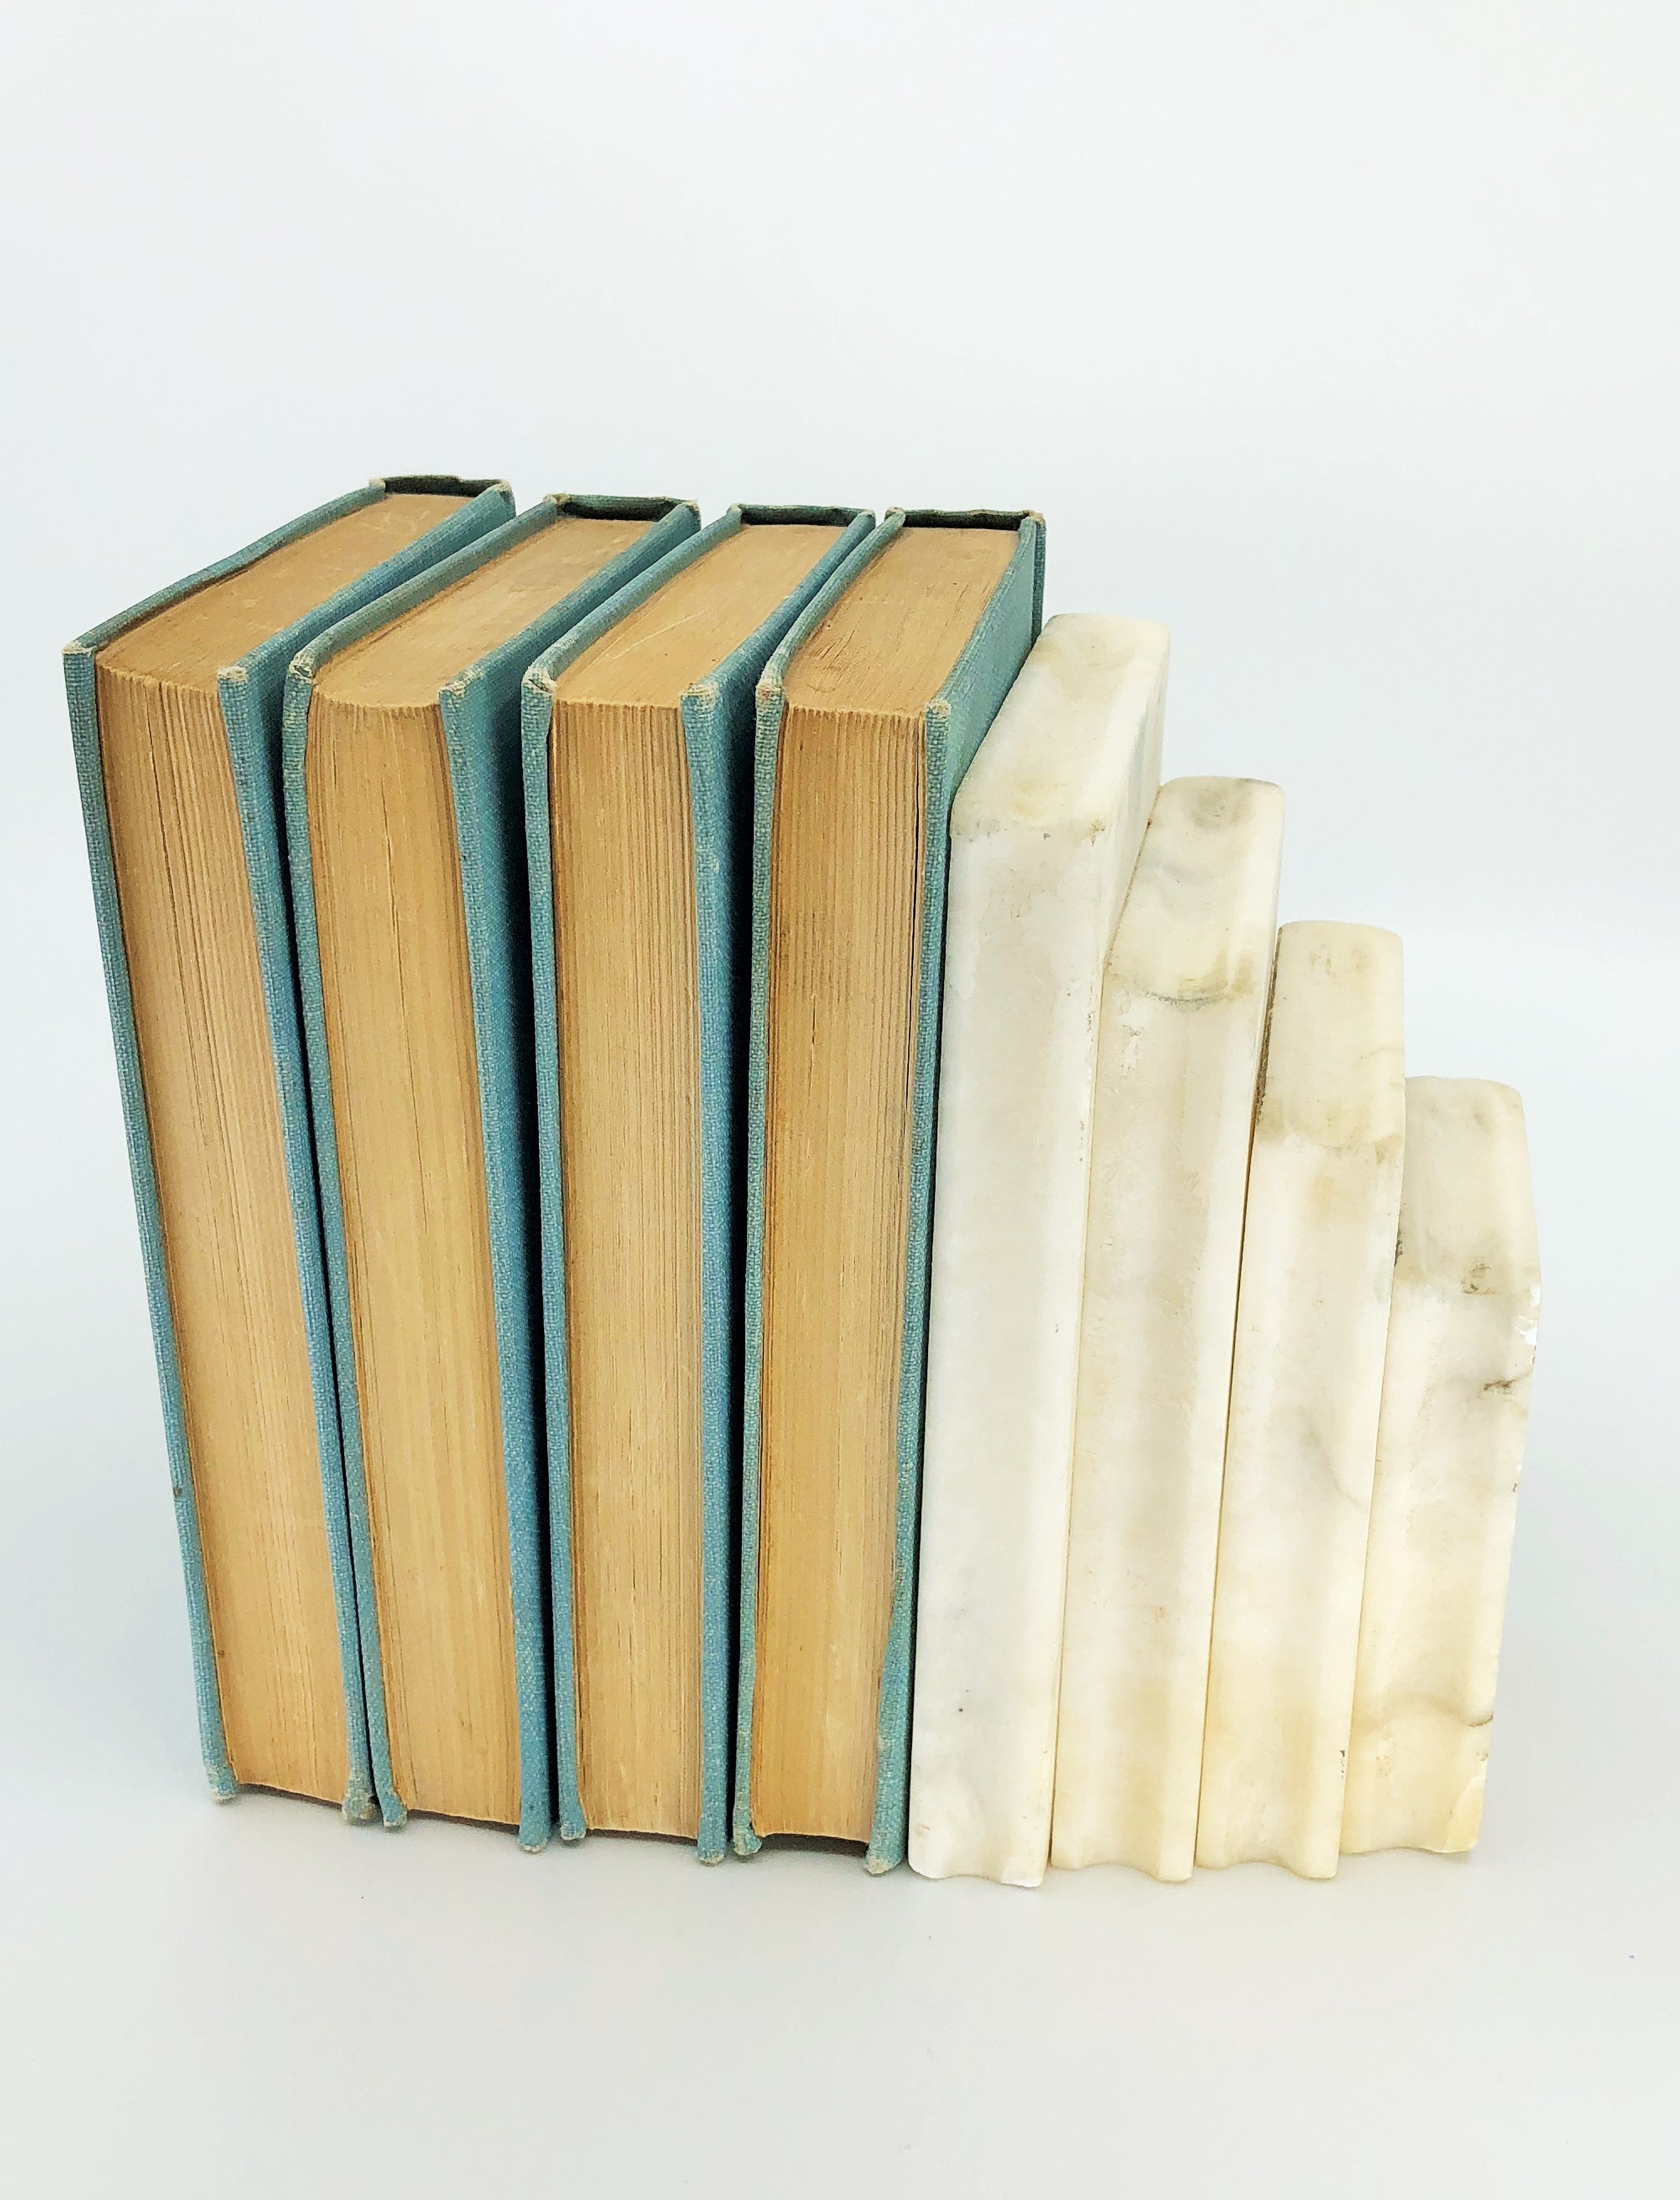 Vintage Italian Marble Stacked Books Bookend